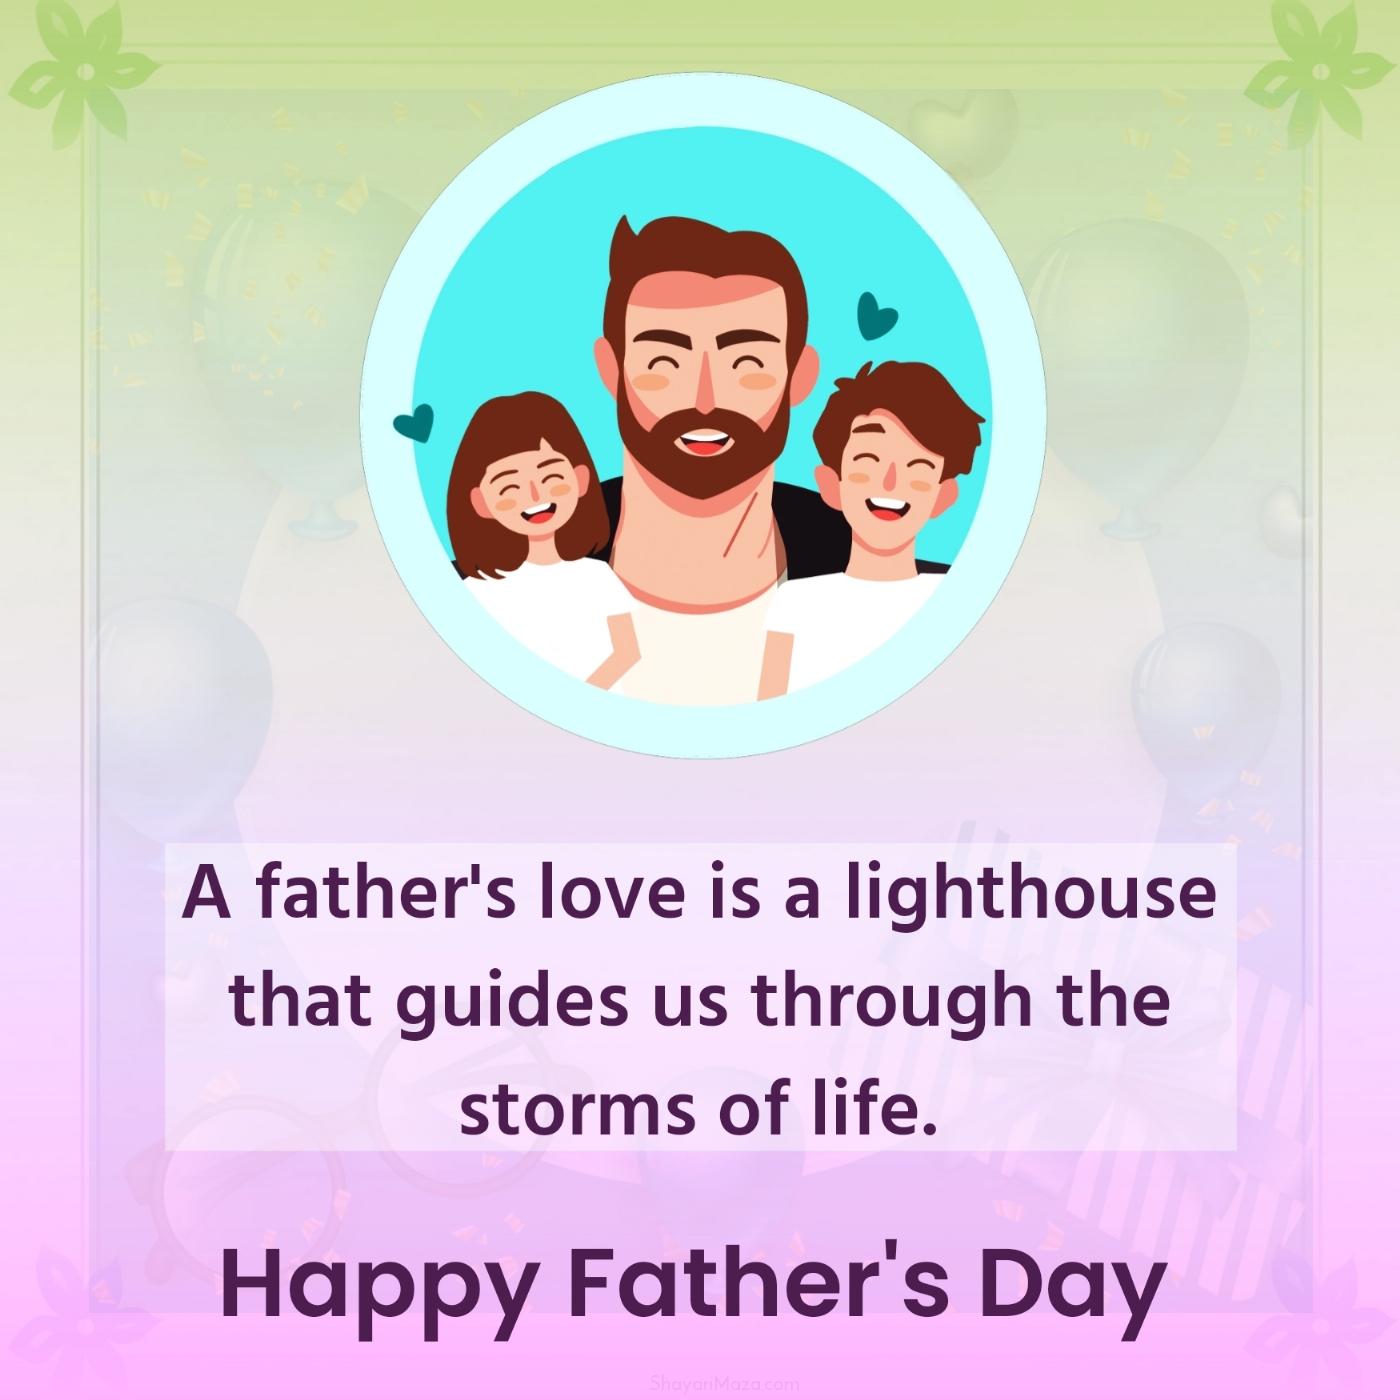 A father's love is a lighthouse that guides us through the storms